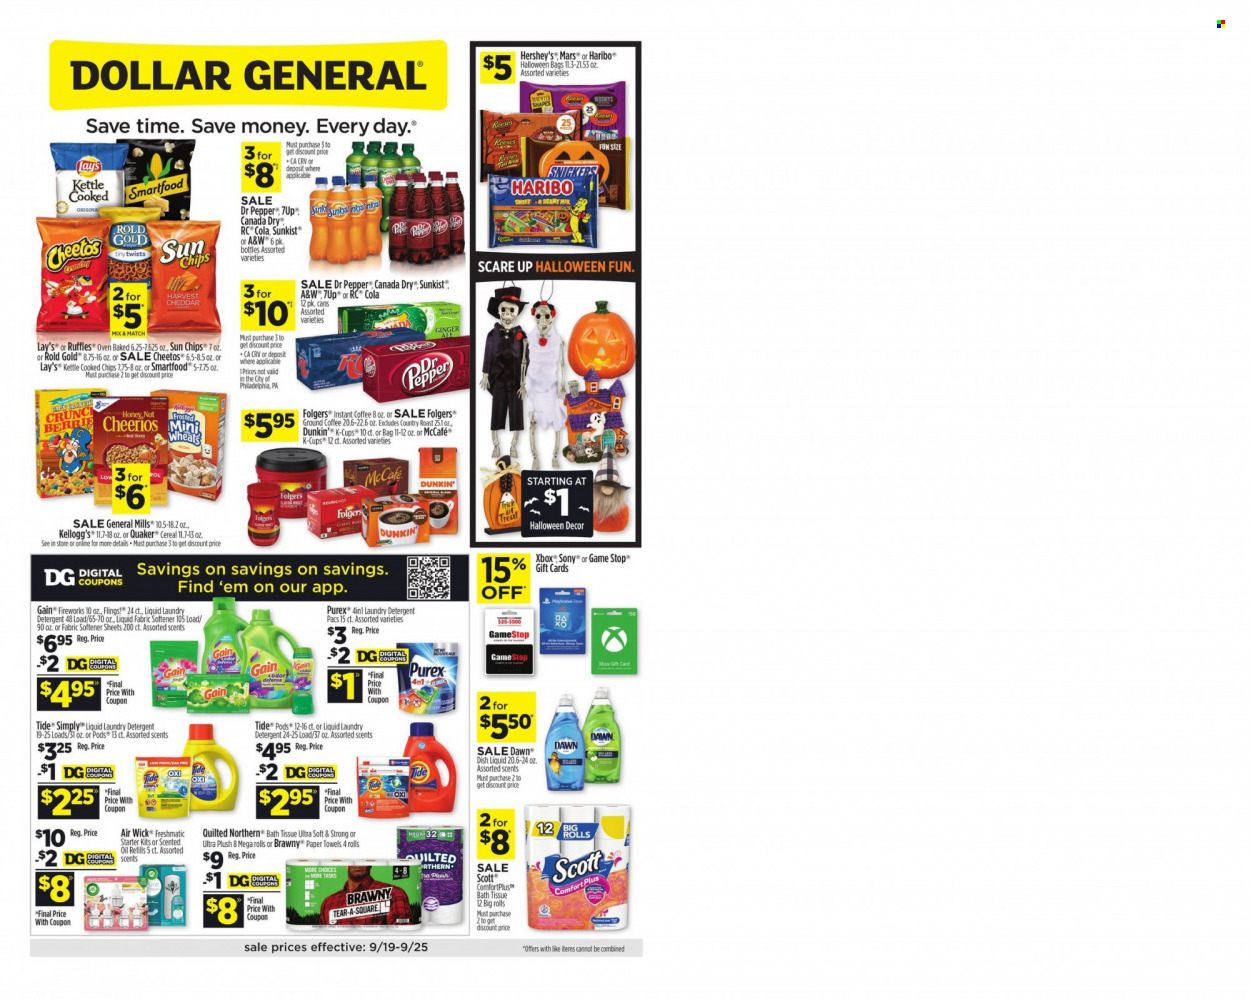 thumbnail - Dollar General Flyer - 09/19/2021 - 09/25/2021 - Sales products - Sony, Scott, Quaker, cheese, Hershey's, Haribo, Mars, Kellogg's, Cheetos, chips, Lay’s, kettle, Smartfood, Ruffles, cereals, Cheerios, oil, Canada Dry, Dr. Pepper, 7UP, A&W, instant coffee, Folgers, ground coffee, coffee capsules, McCafe, K-Cups, bath tissue, Quilted Northern, kitchen towels, paper towels, detergent, Gain, Tide, fabric softener, laundry detergent, Purex, dishwashing liquid, Air Wick, scented oil, starter. Page 1.